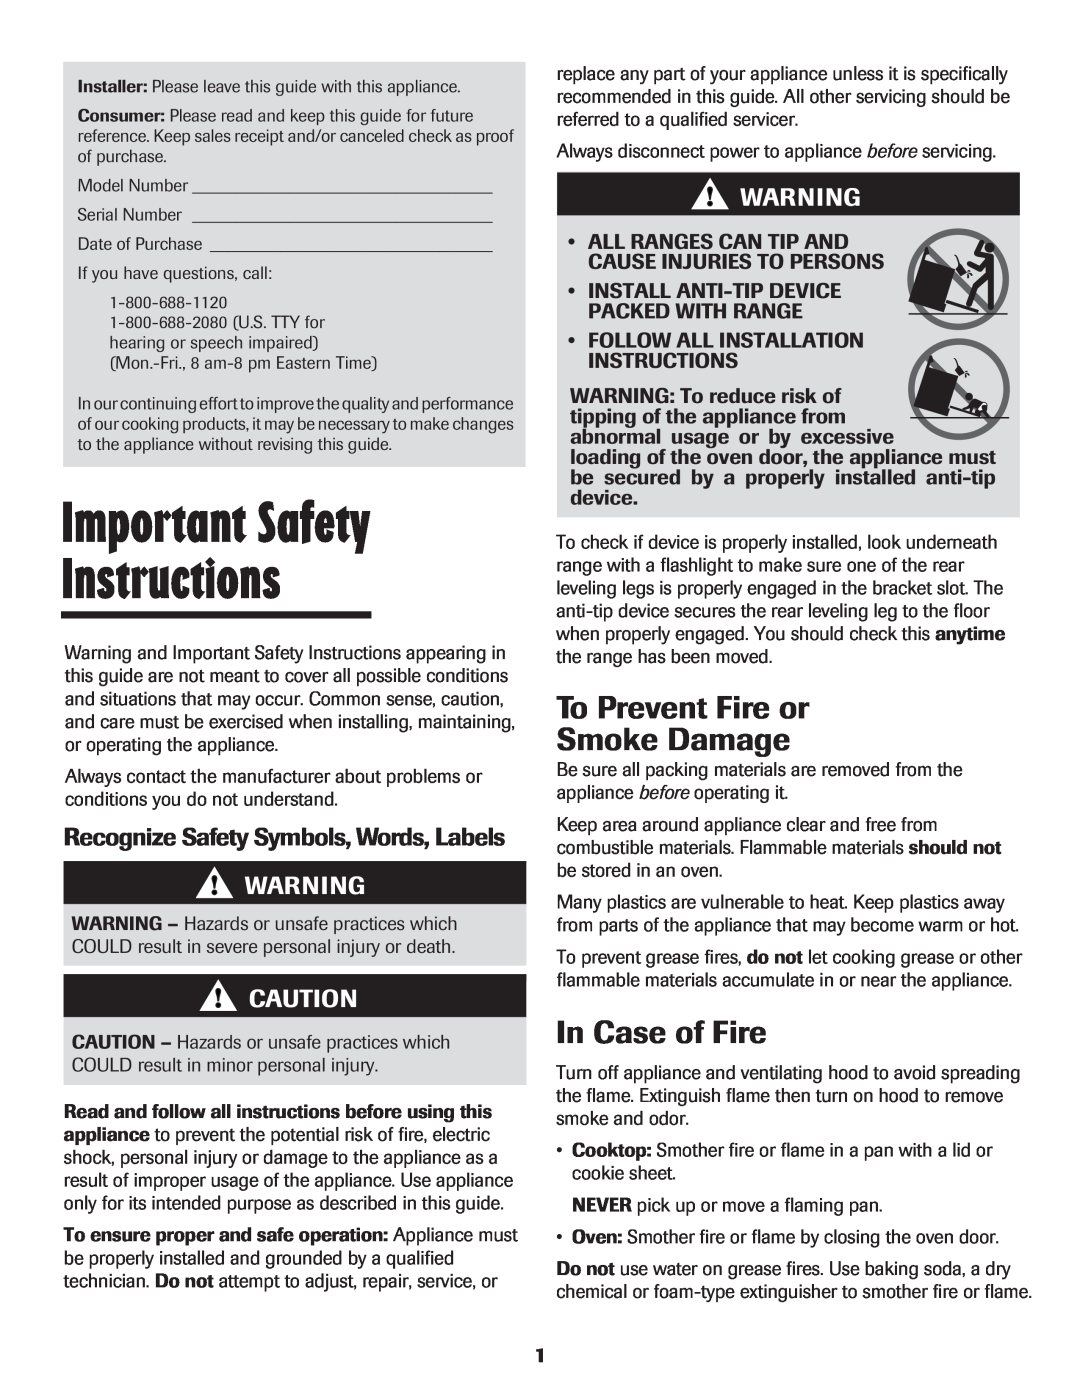 Maytag CER3725AGW Important Safety Instructions, To Prevent Fire or Smoke Damage, In Case of Fire 